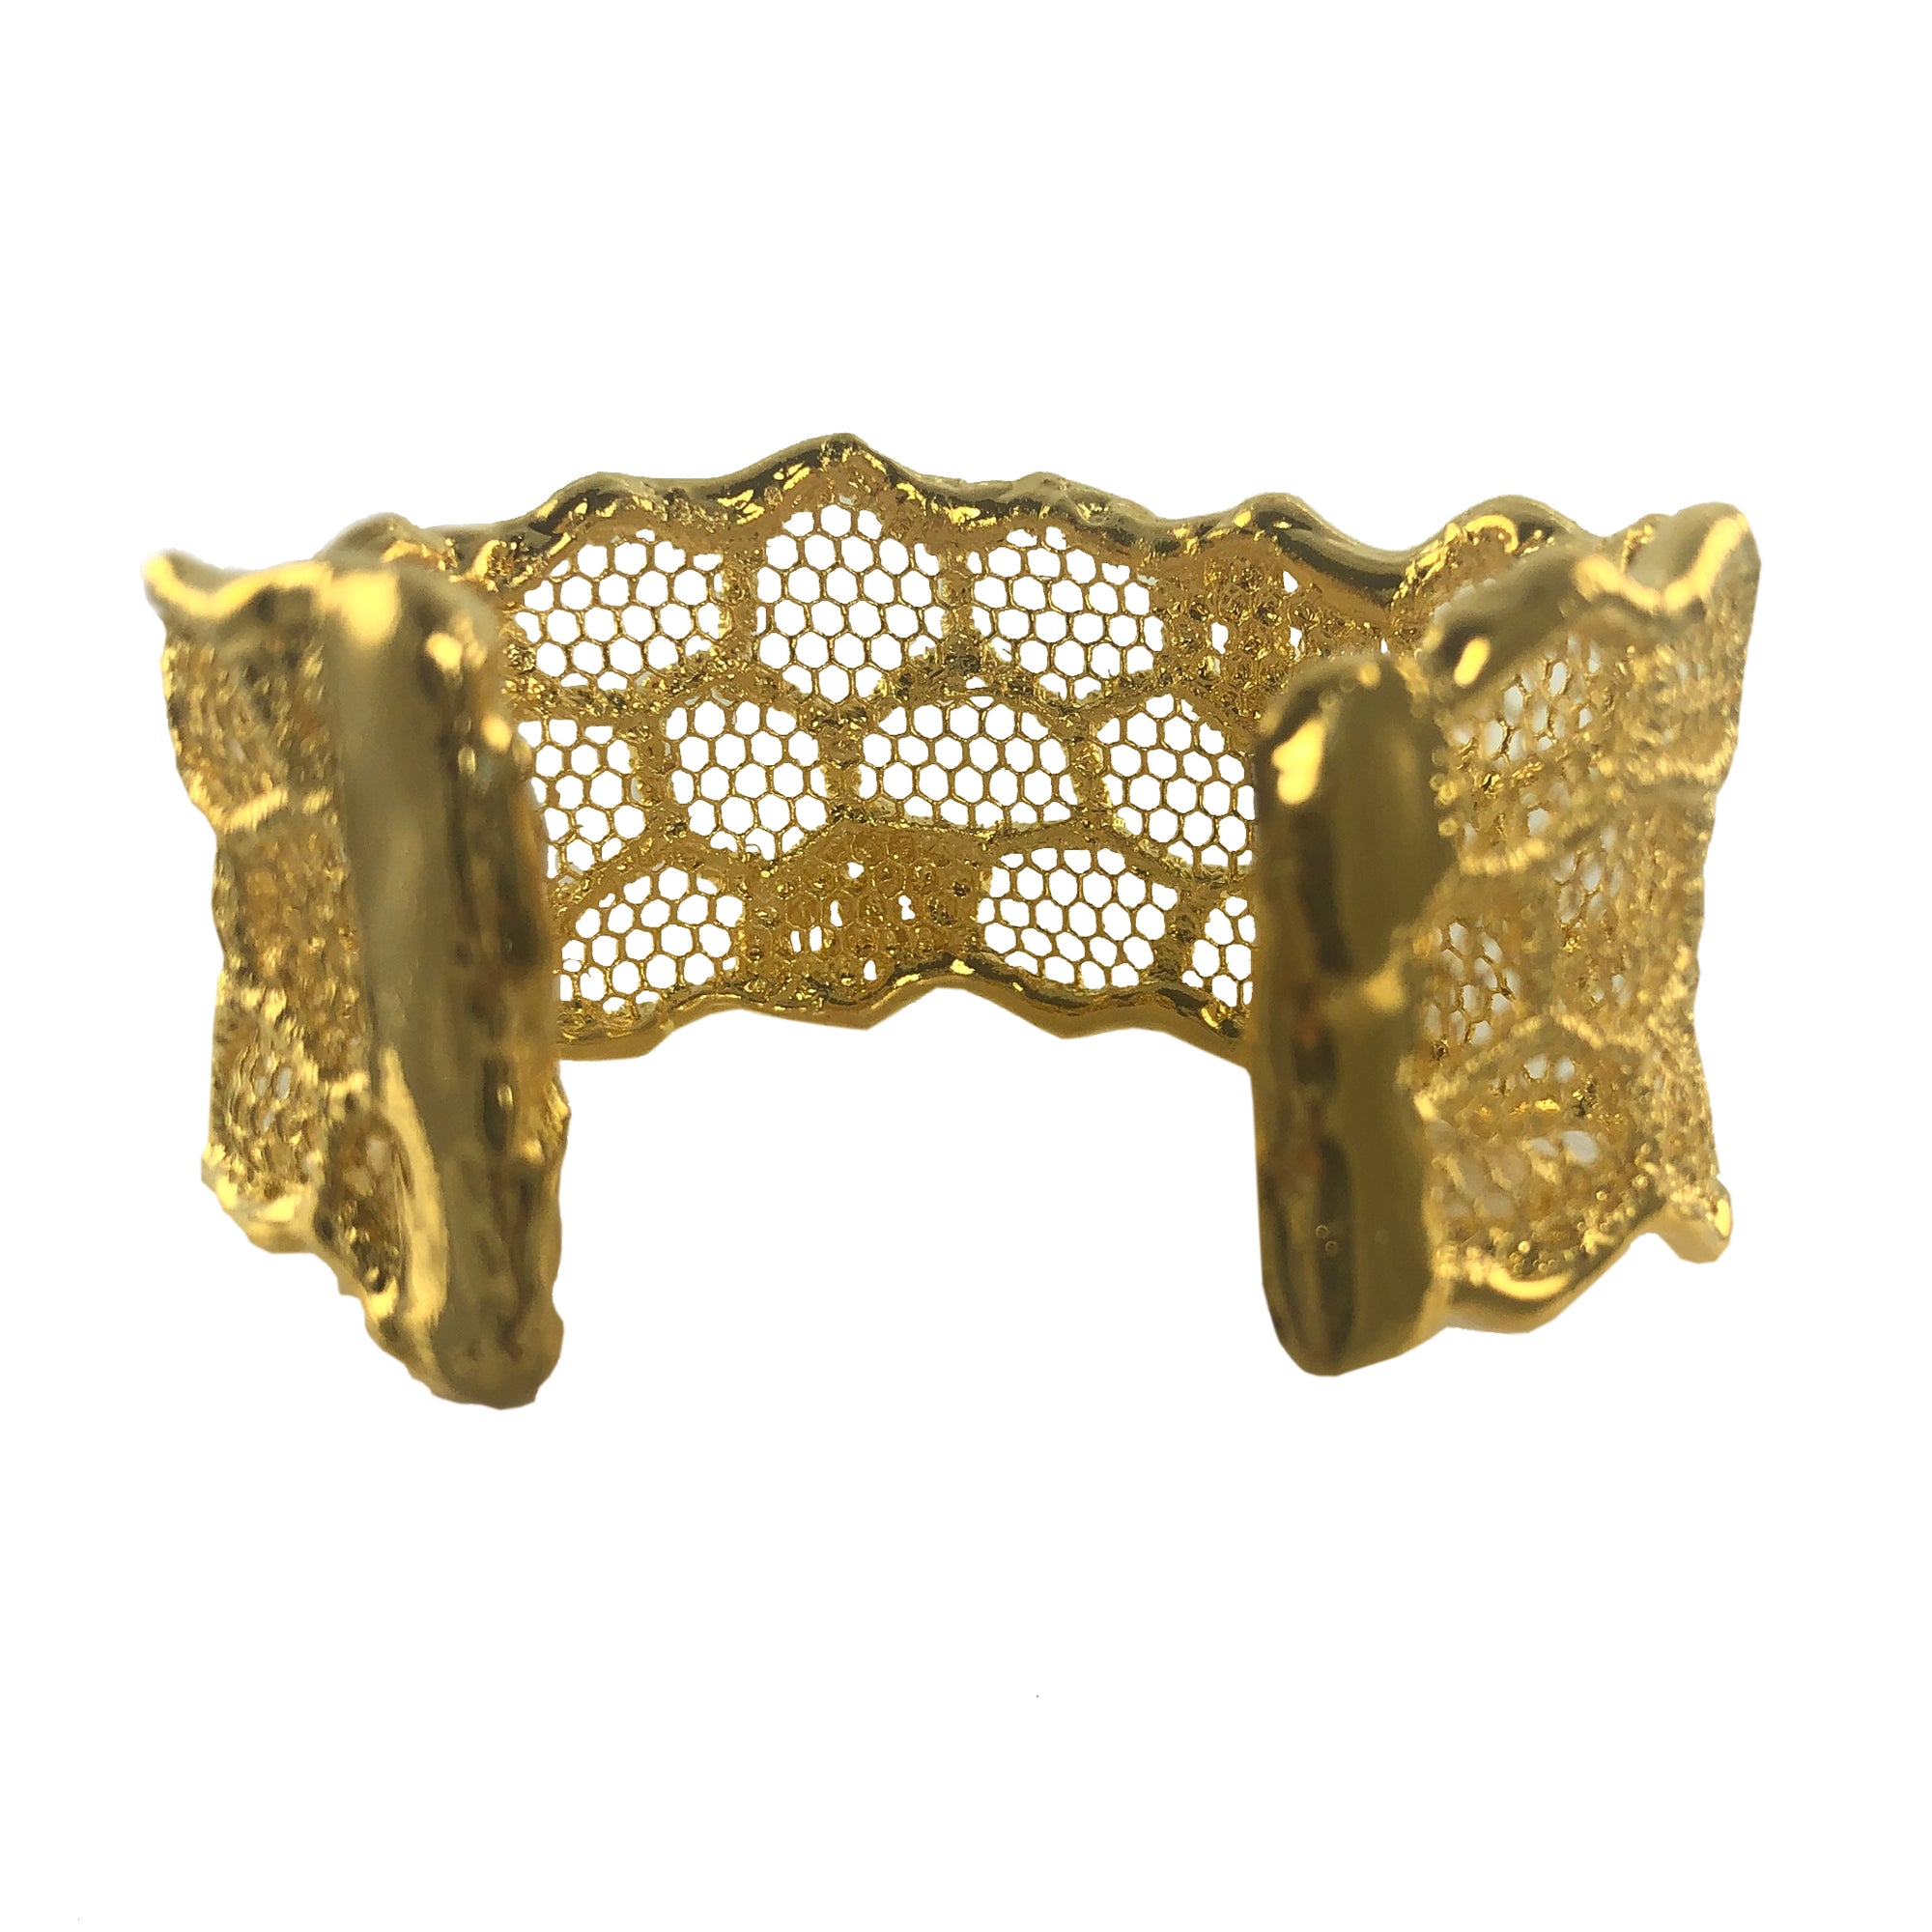 Cuff bracelet made from an intricate honeycomb lace dipped in 24k gold.